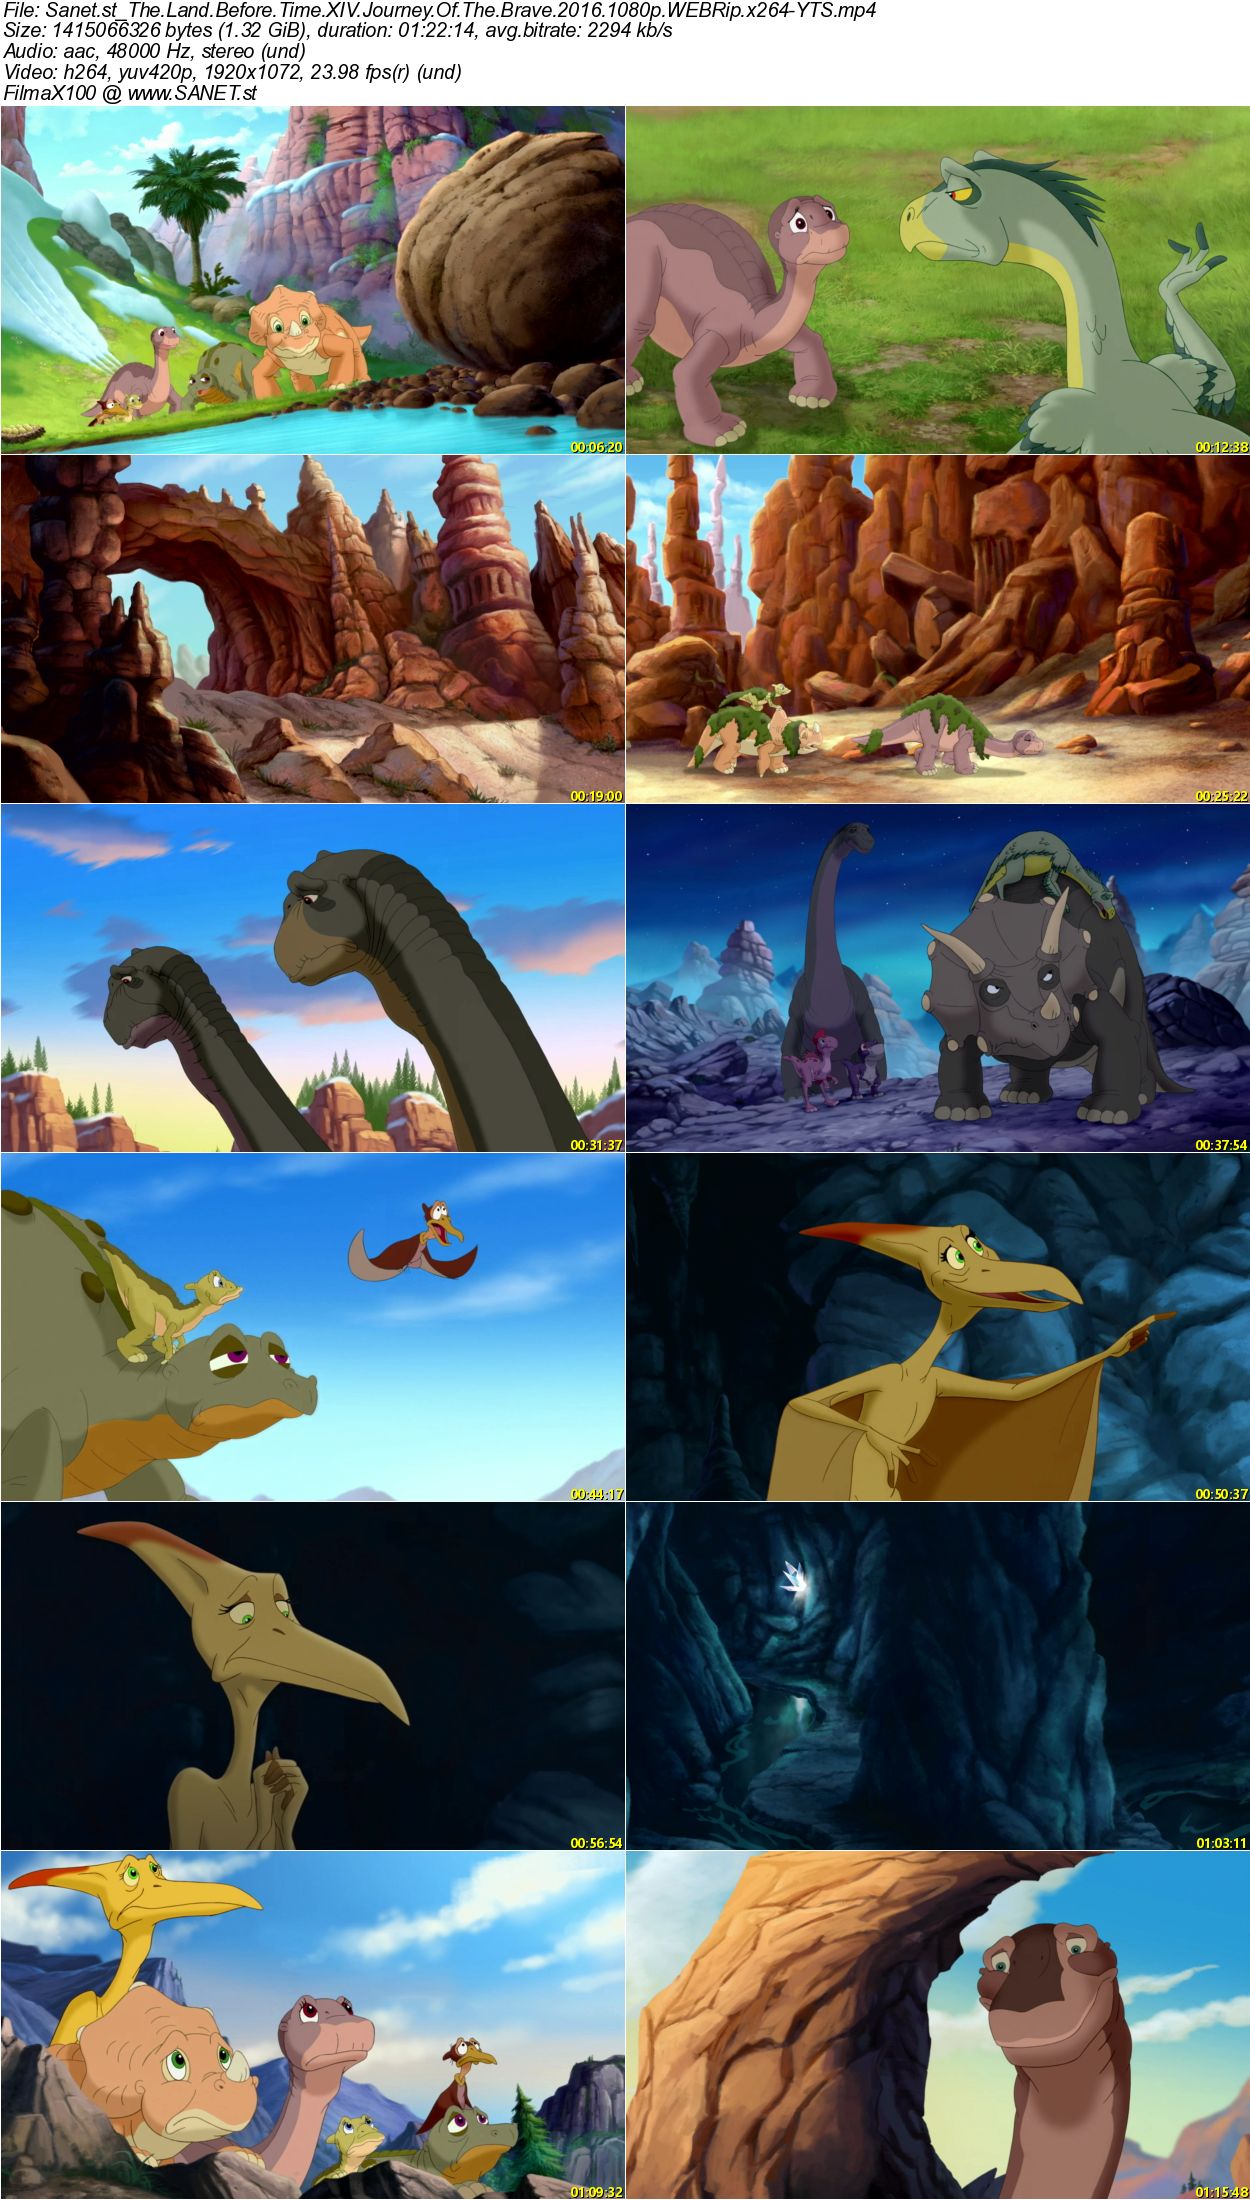 the land before time 14 journey of the brave download